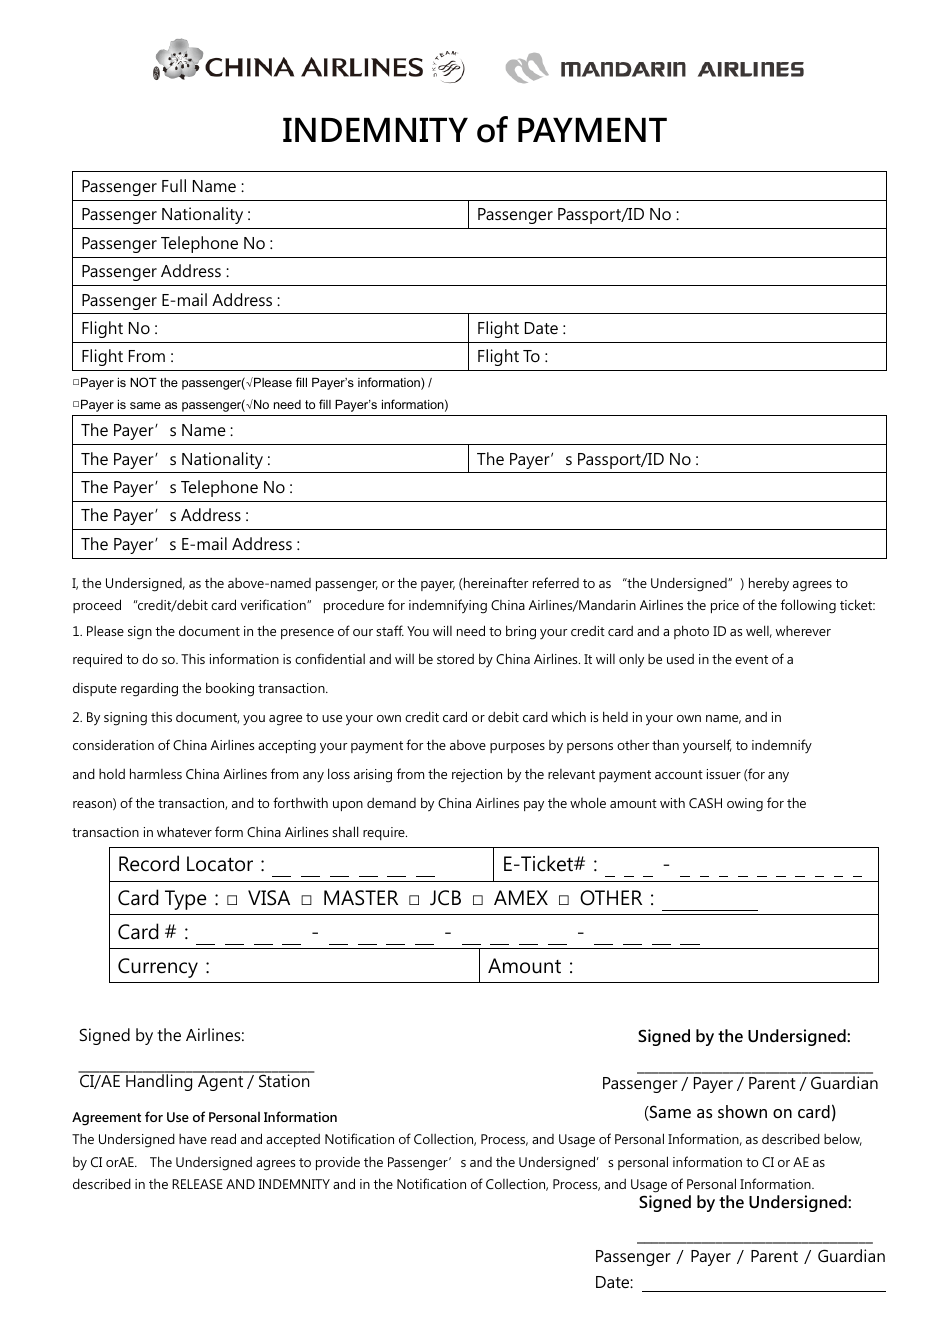 Credit Card Authorization Form - China Airlines, Page 1